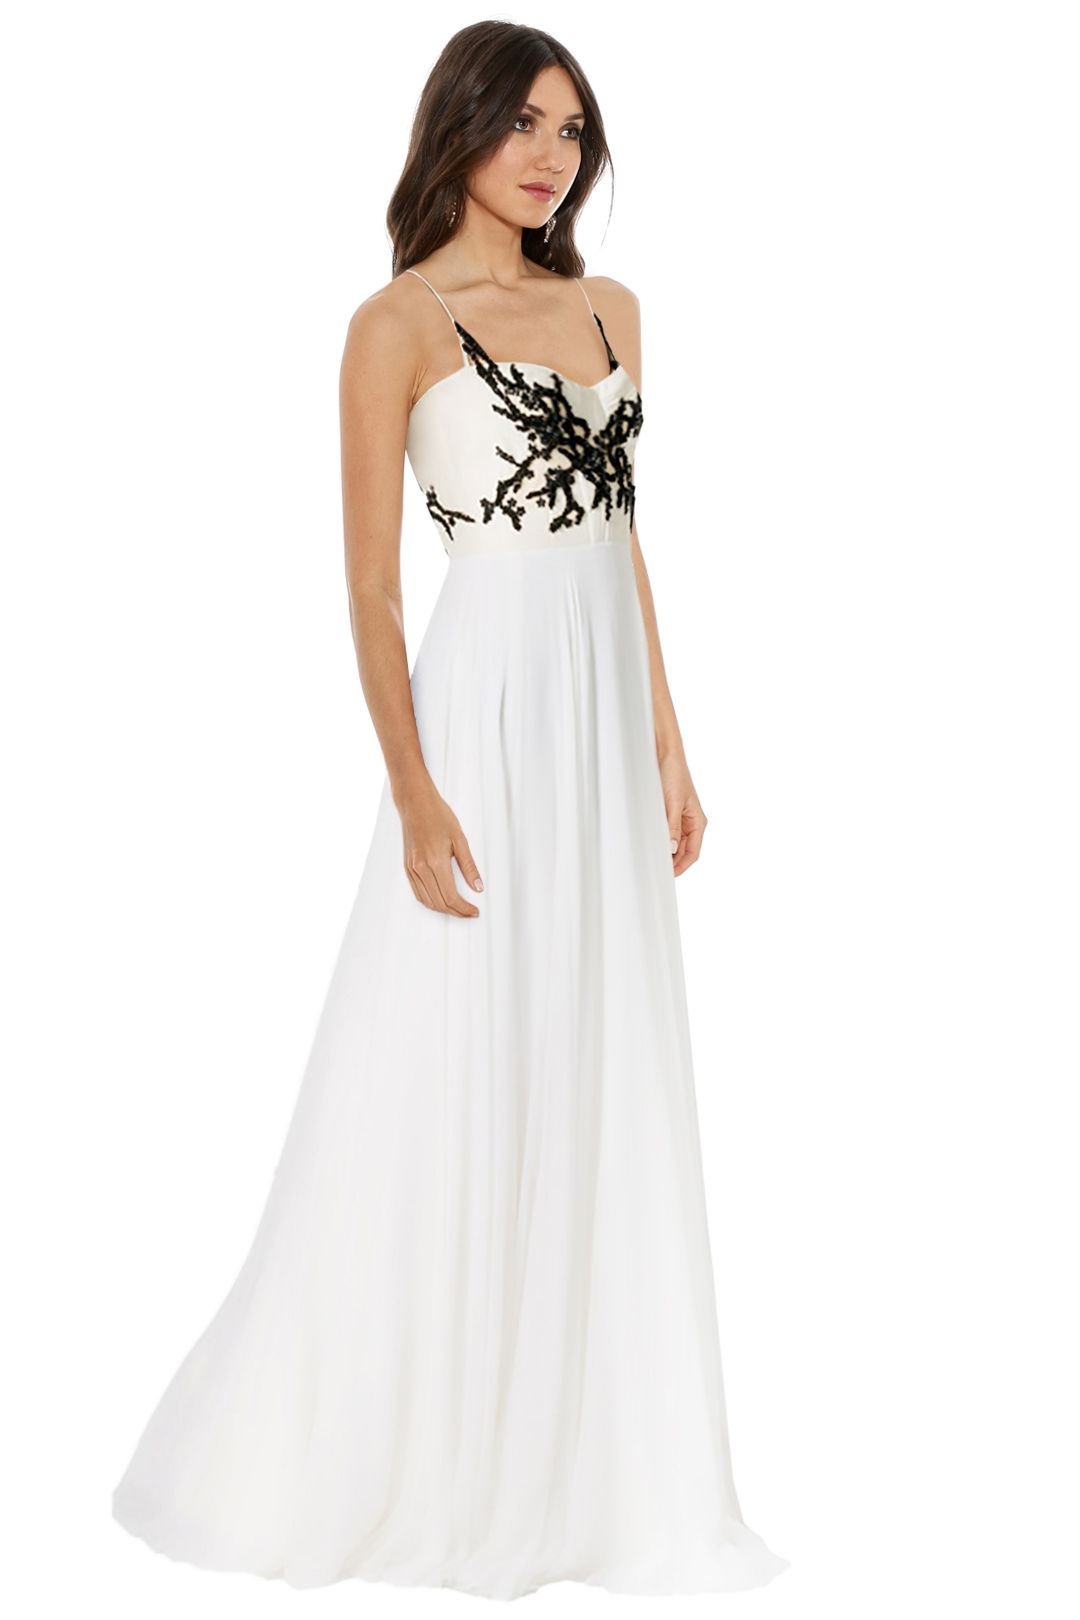 Alex Perry - Minerva Gown - White - Back